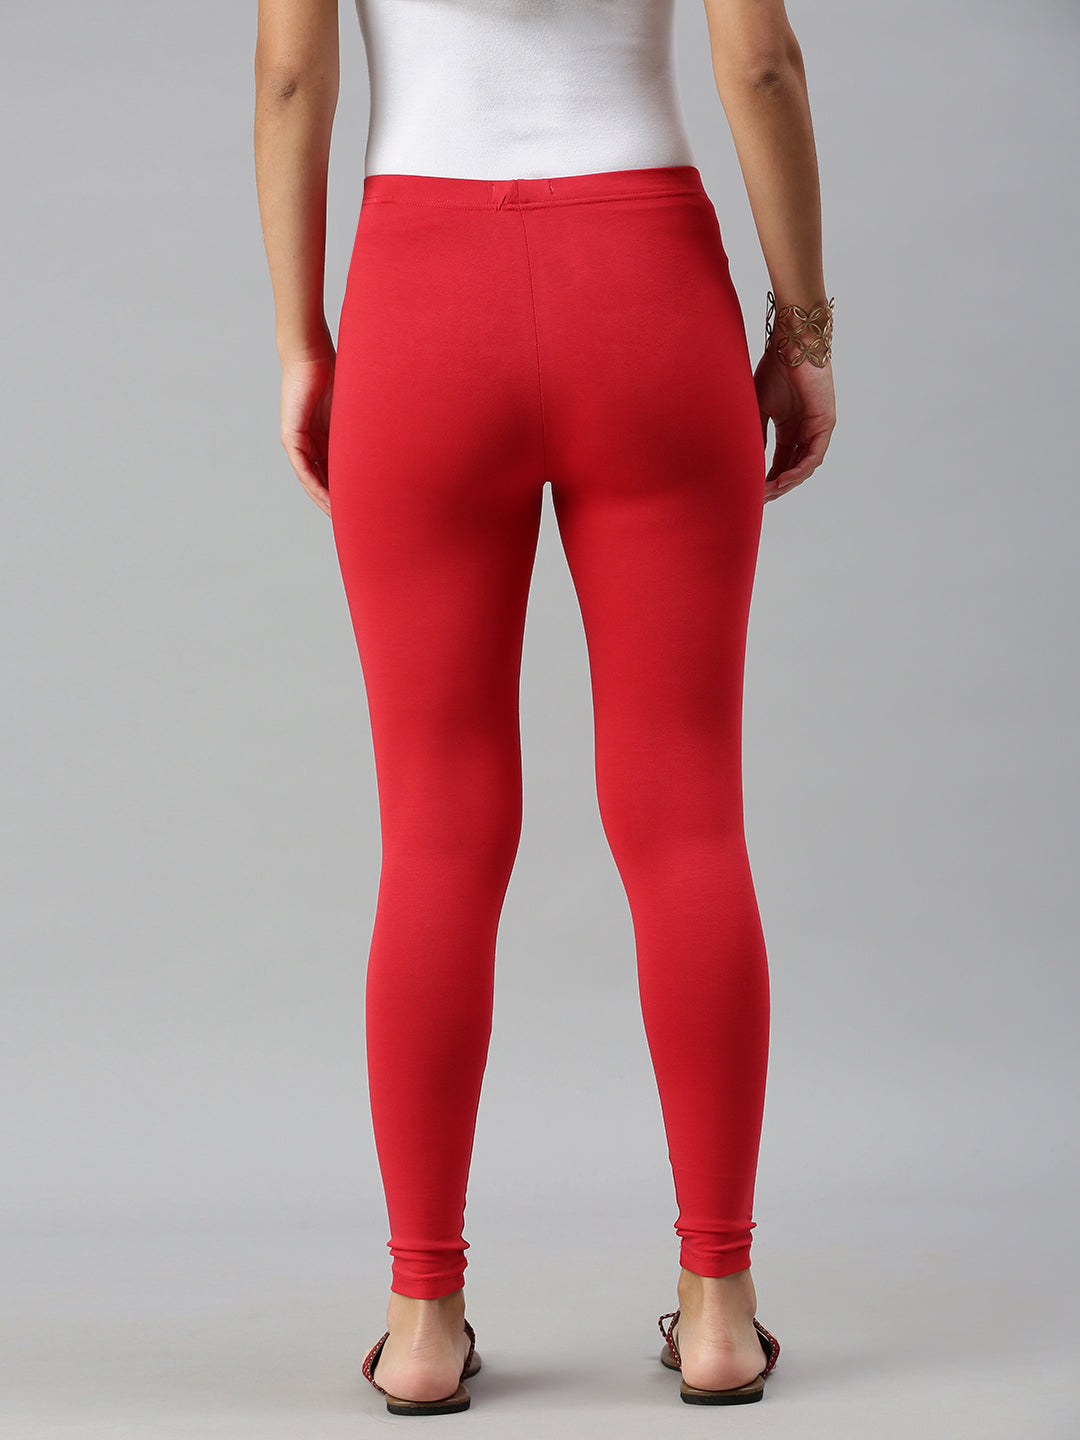 Organic Cotton+Spandex Ankle Length Leggings for Girls - Red | CAOMP